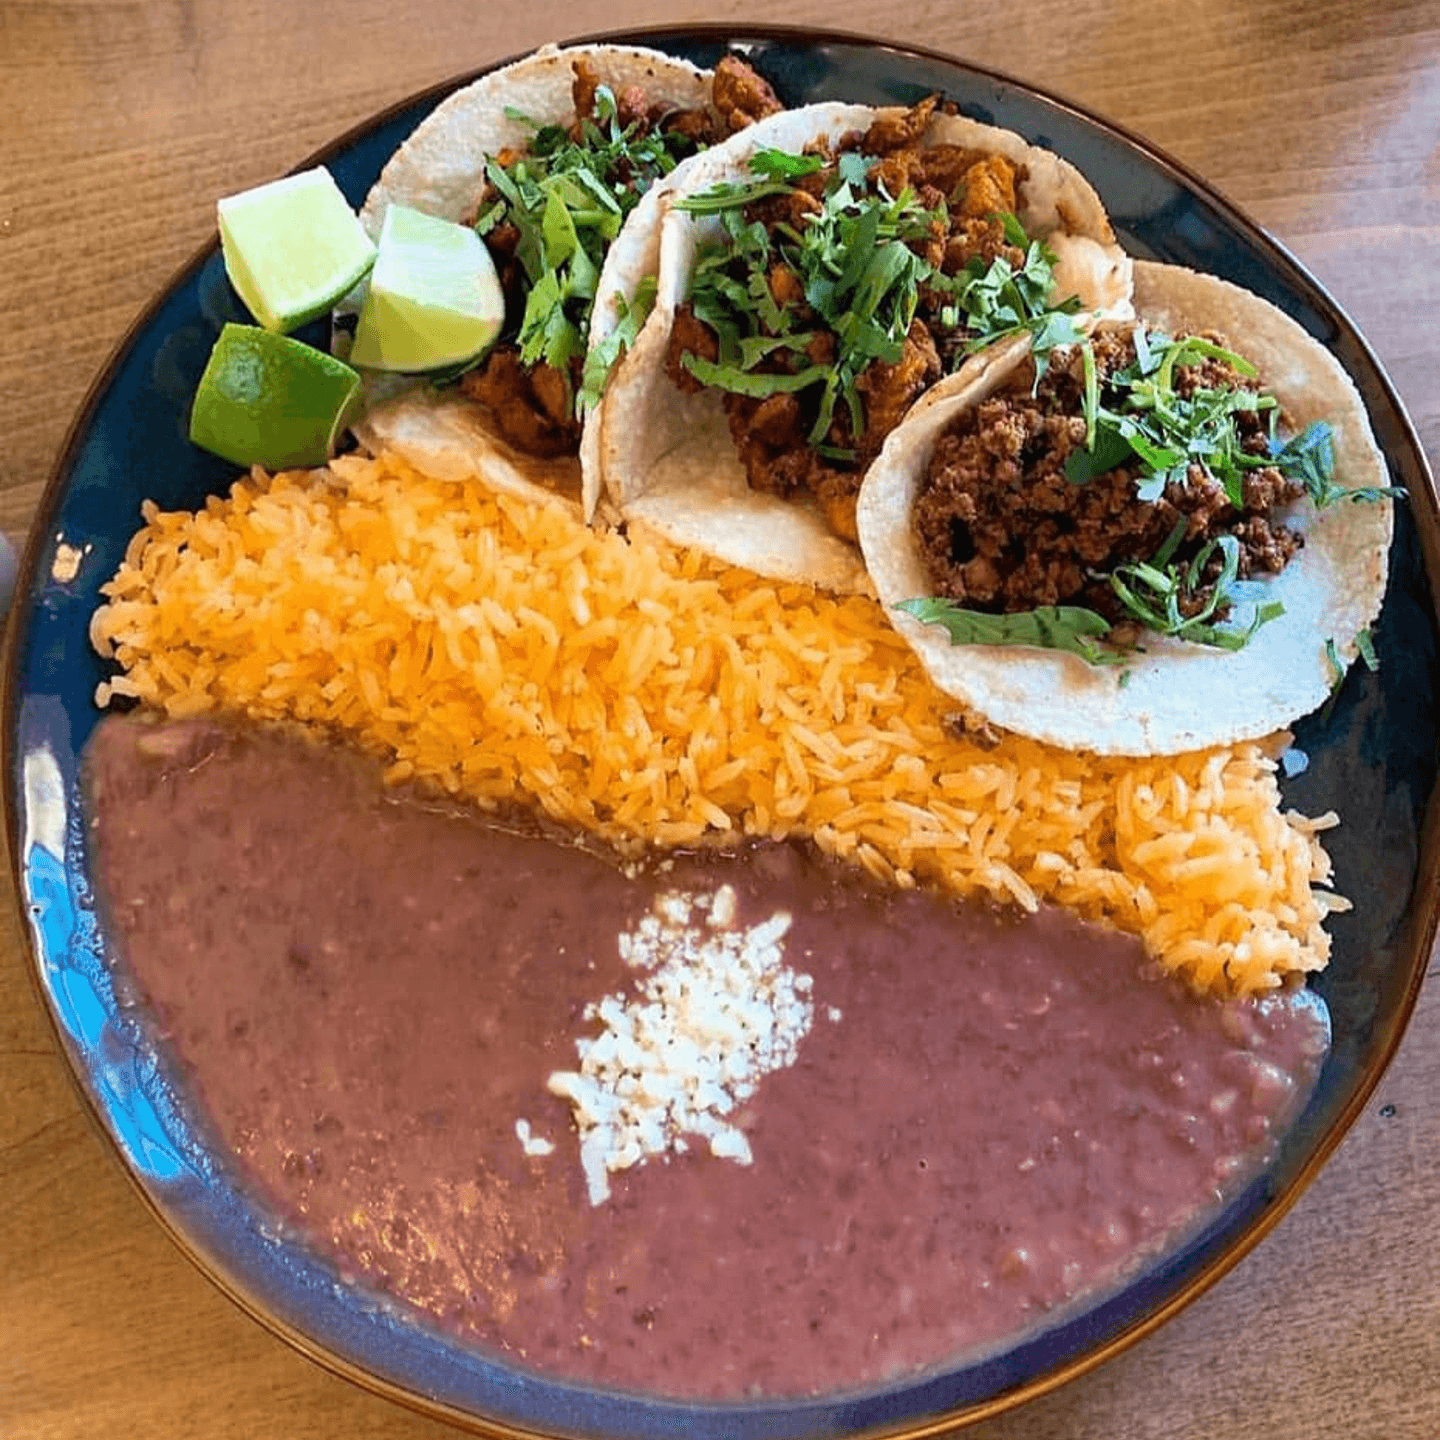 Tacos, Savory Beans, and Rice Delights